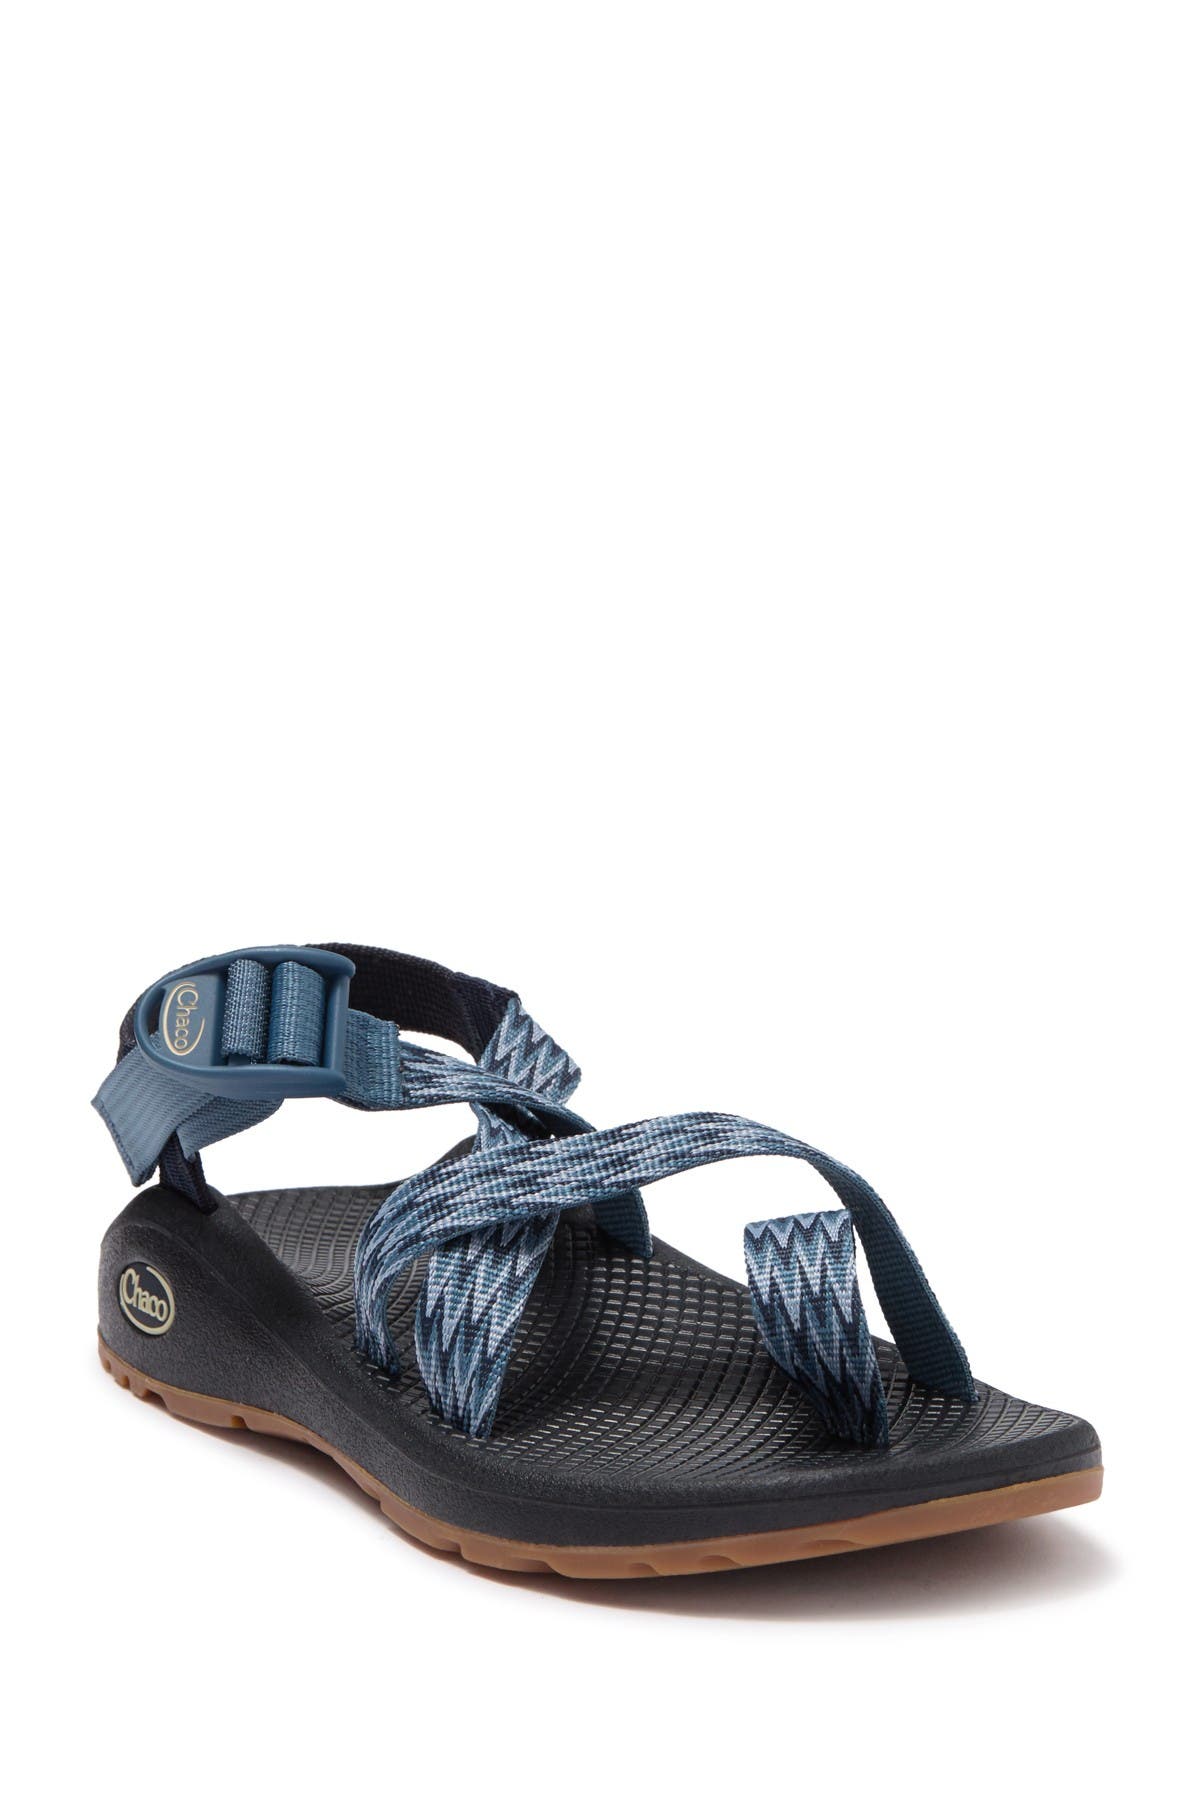 chaco sandals nordstrom rack